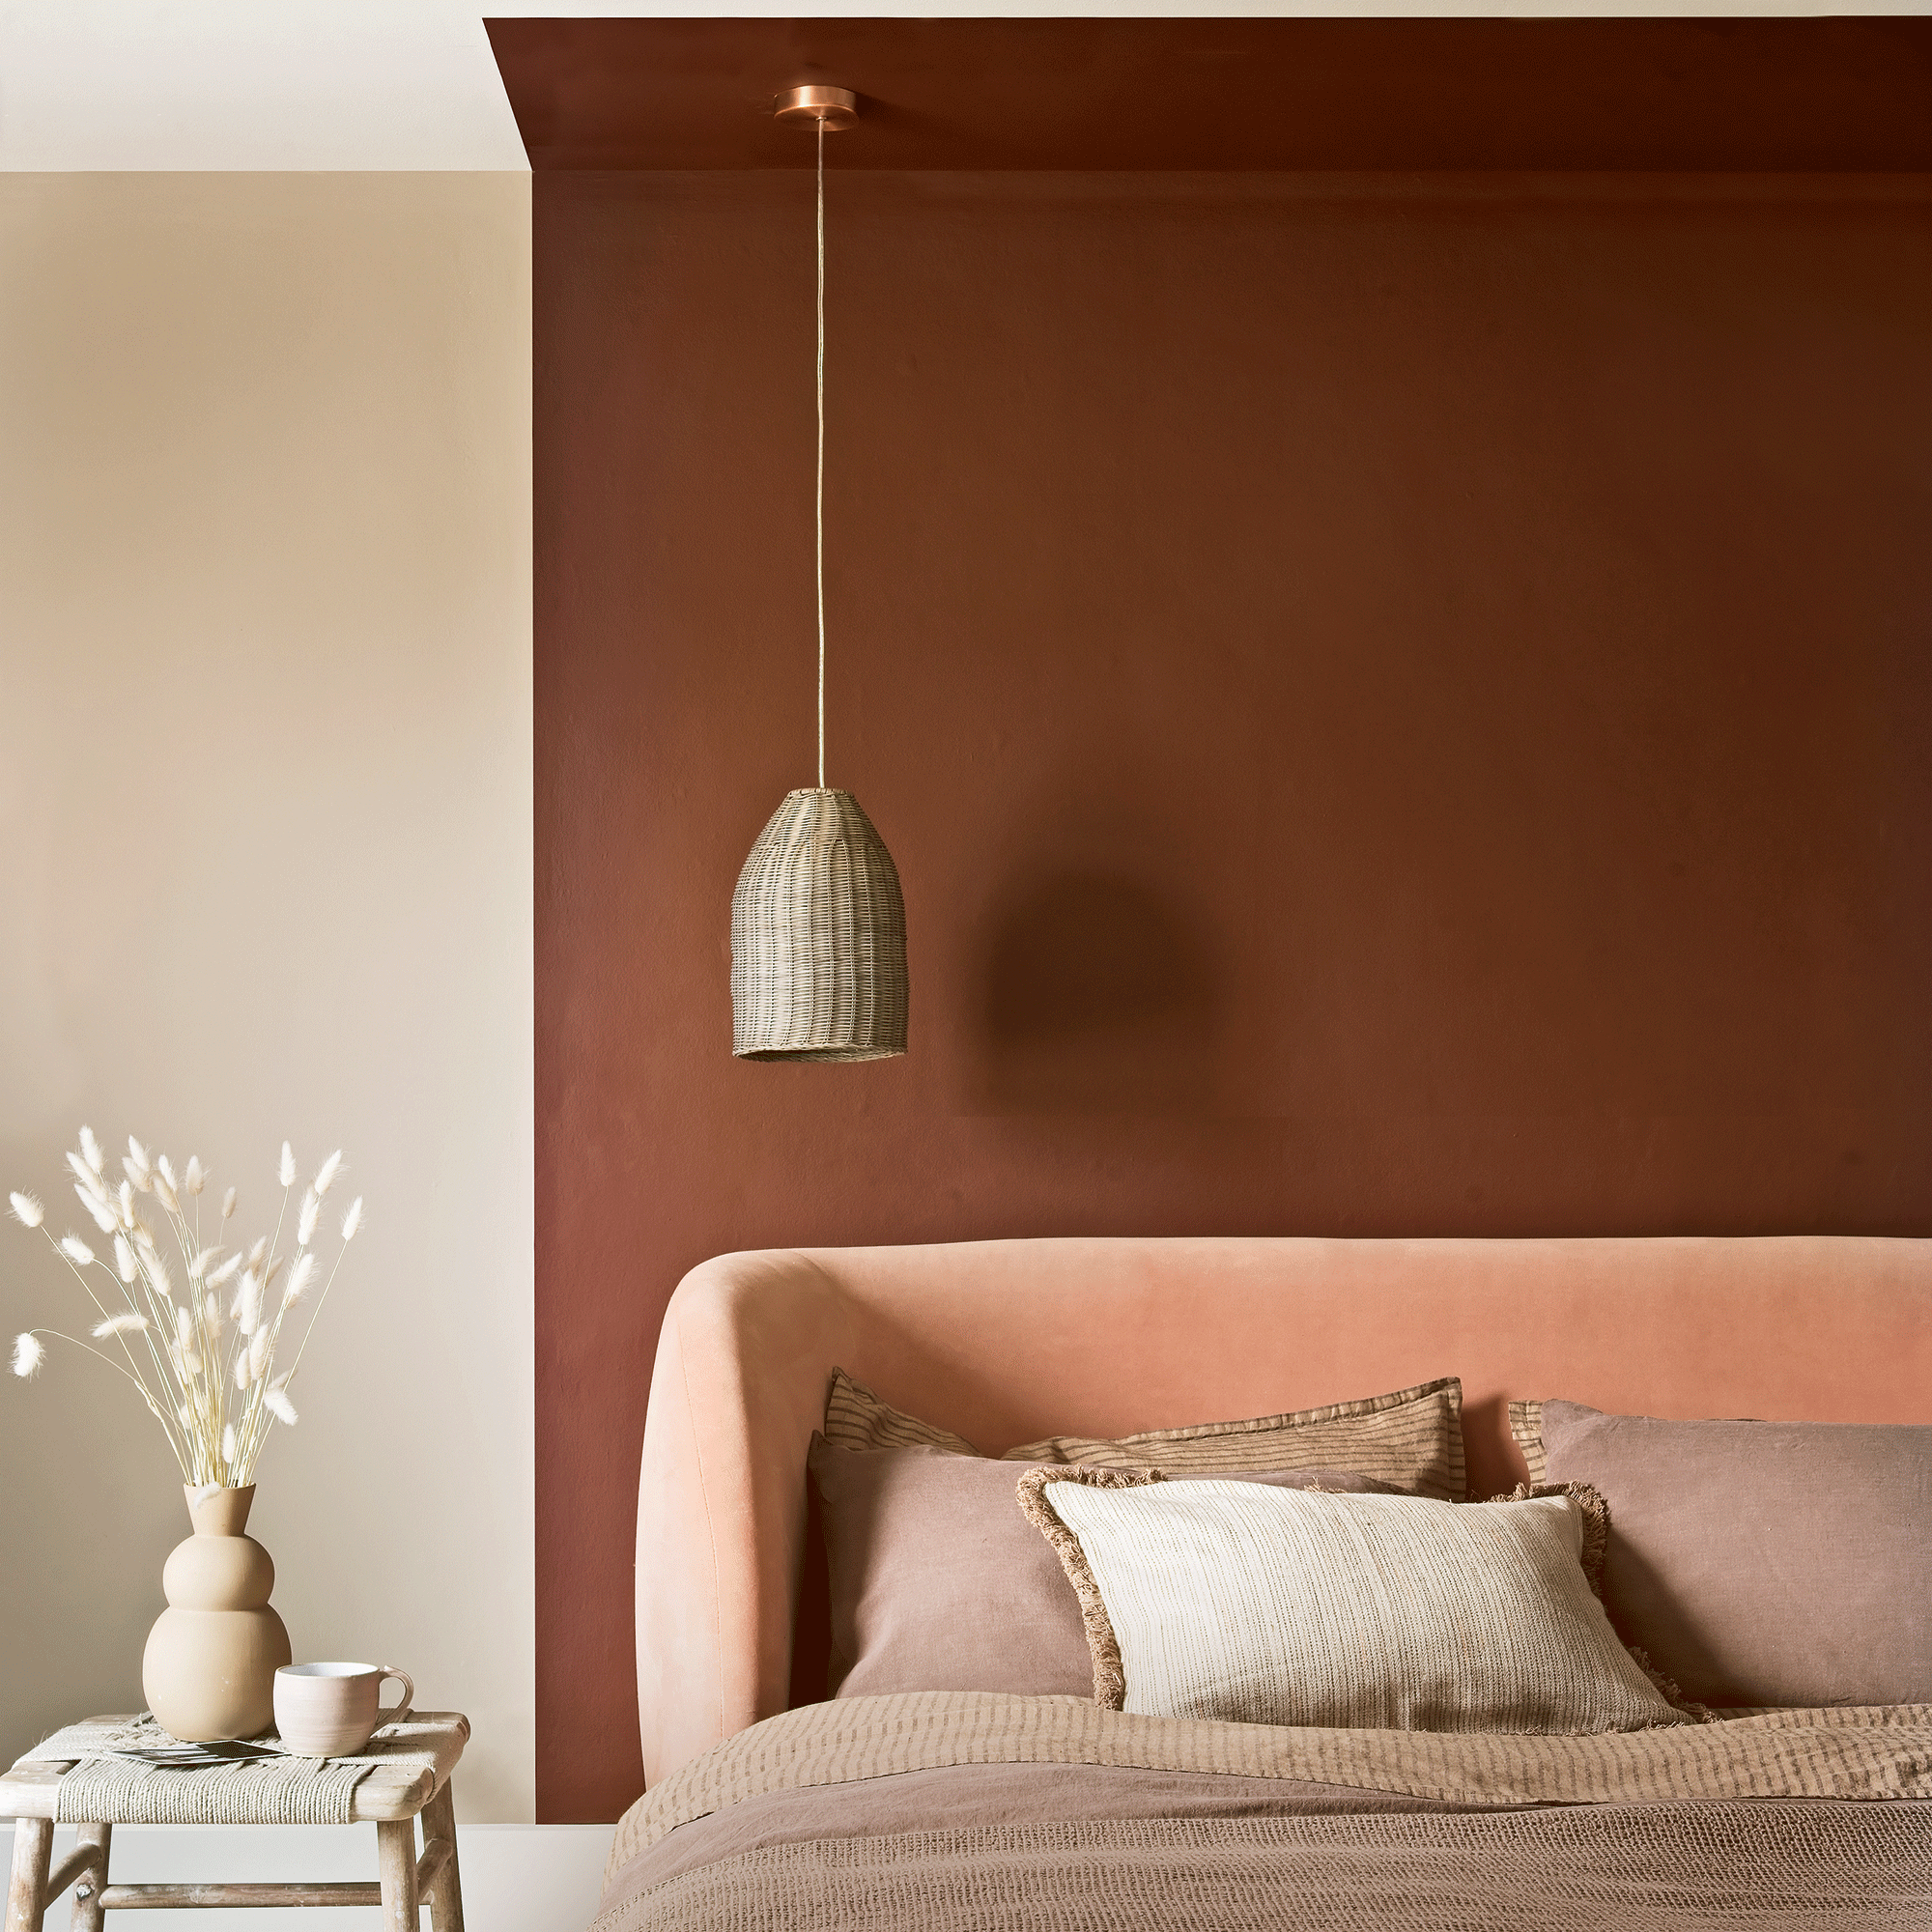 Red and brown painted bedroom